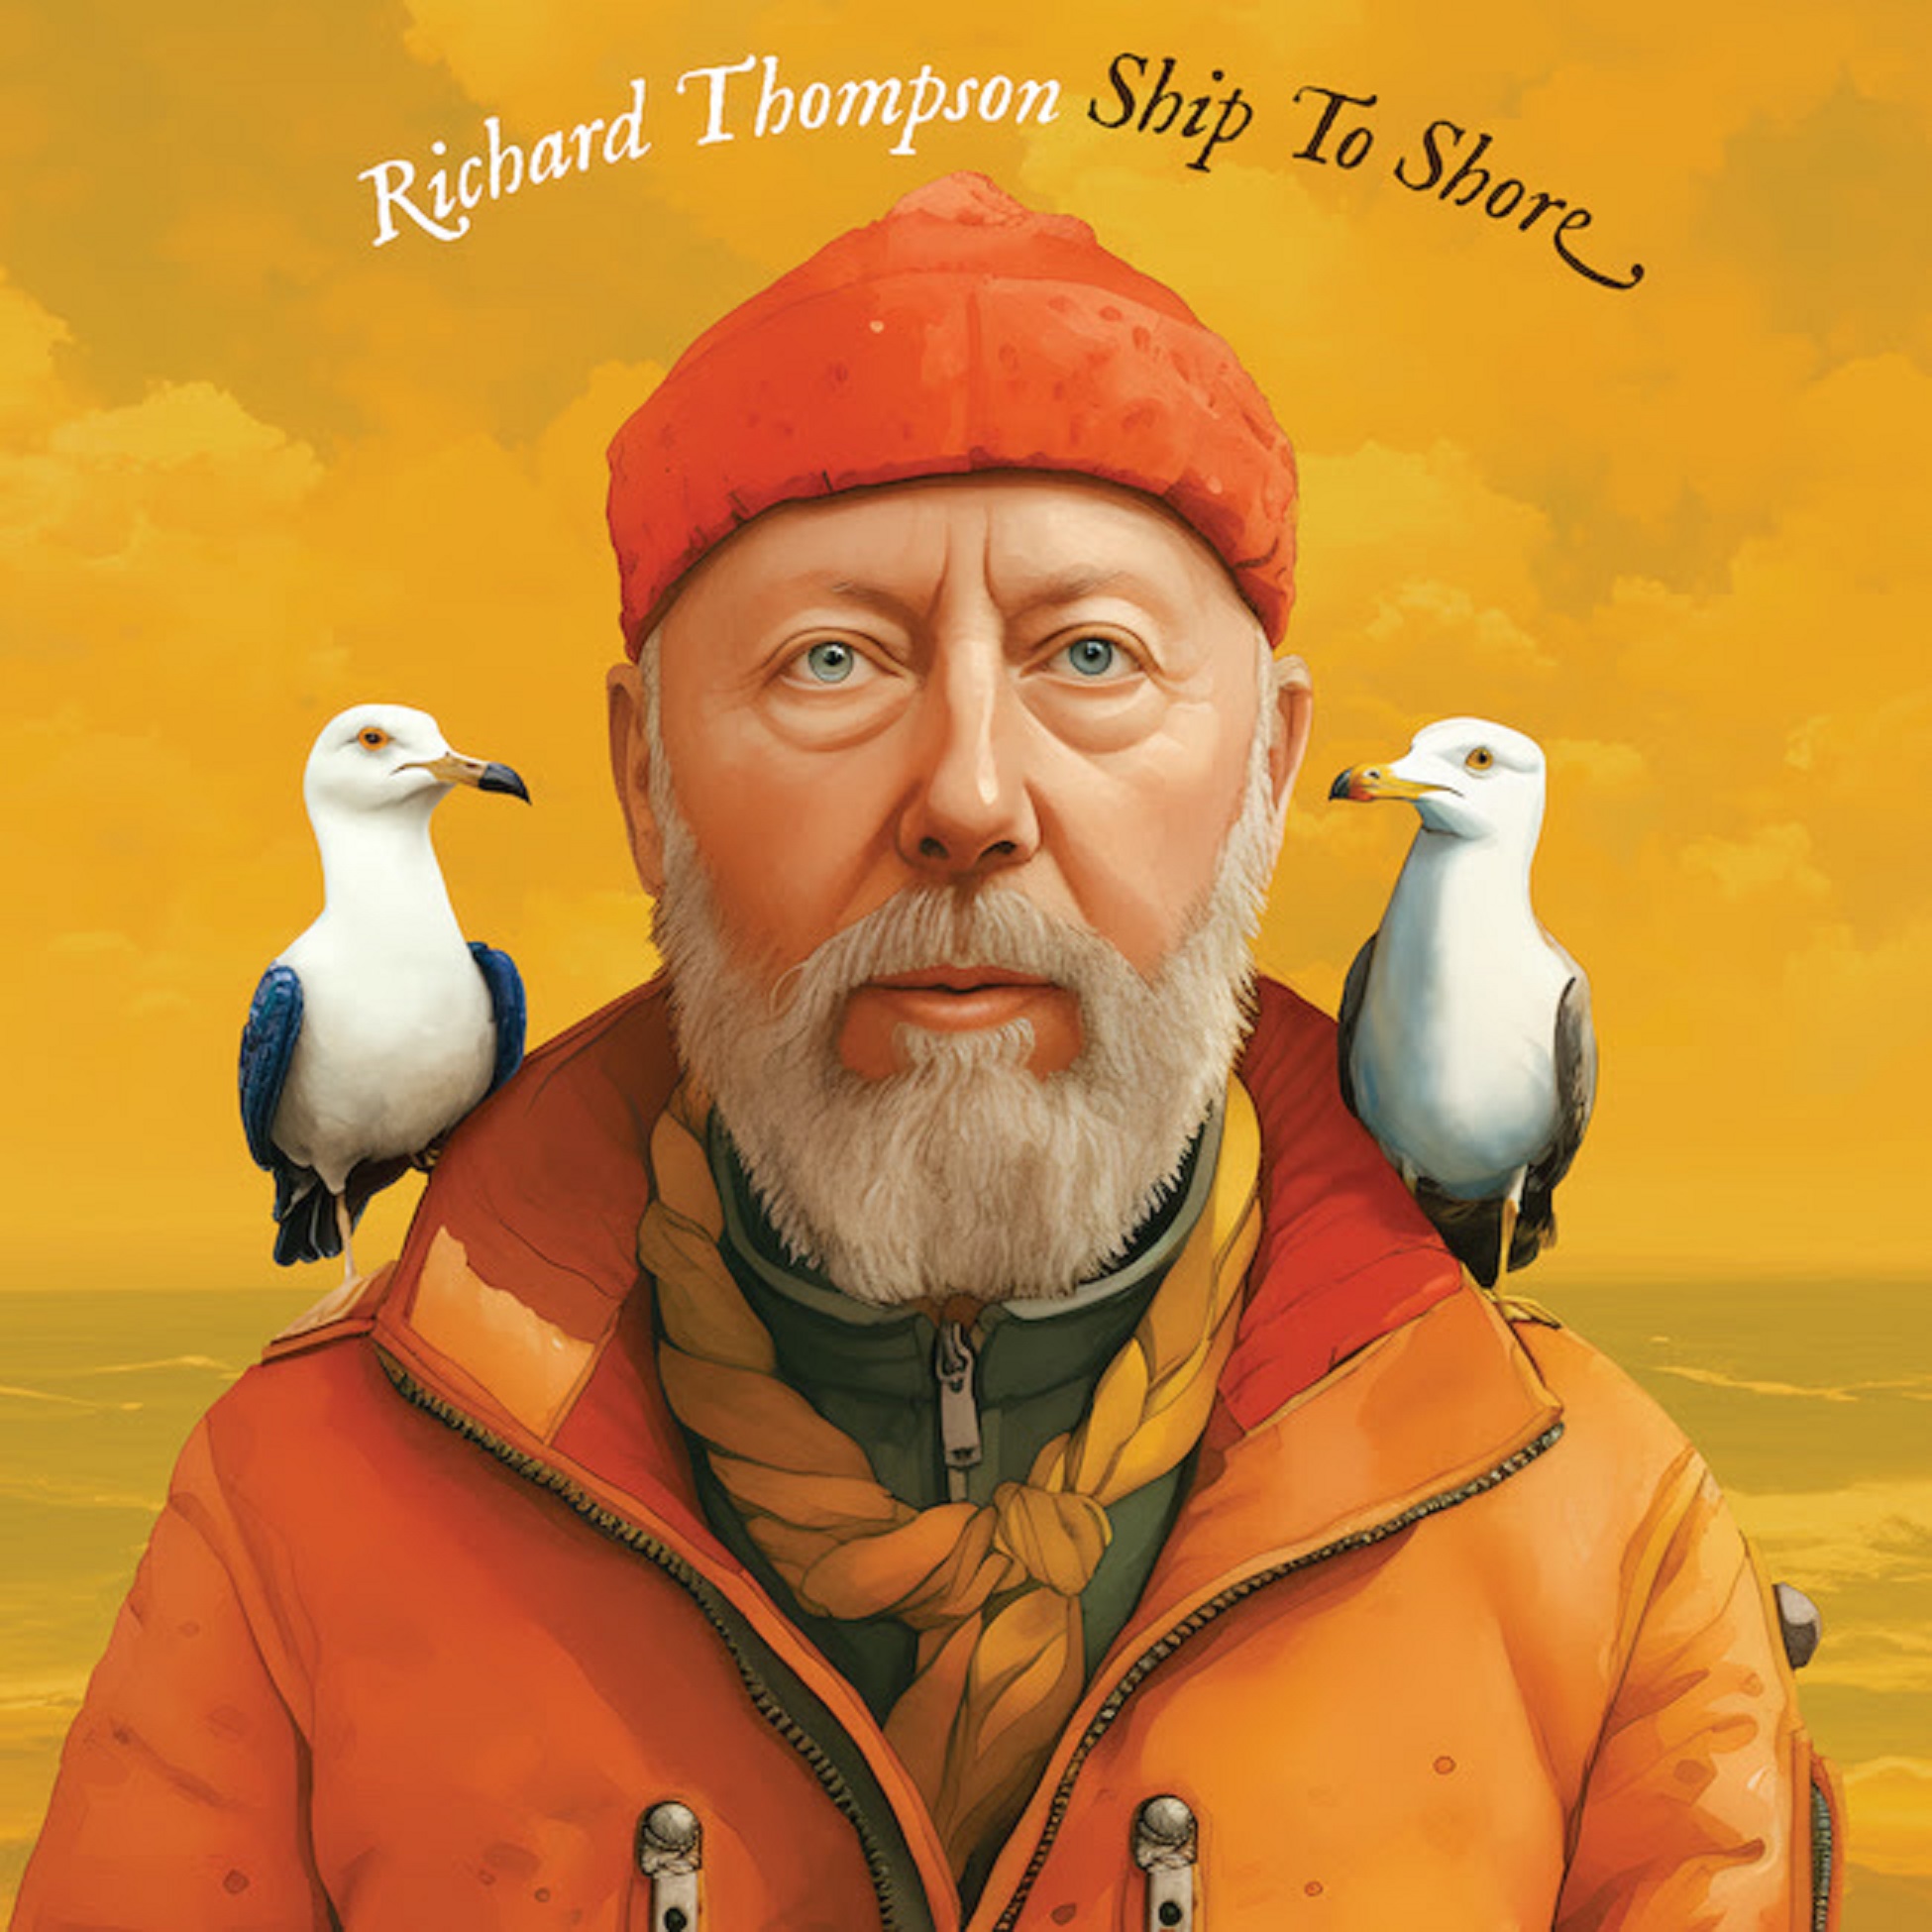 Richard Thompson Returns With "Ship To Shore" May 31 Via New West Records - Shares "Singapore Sadie"